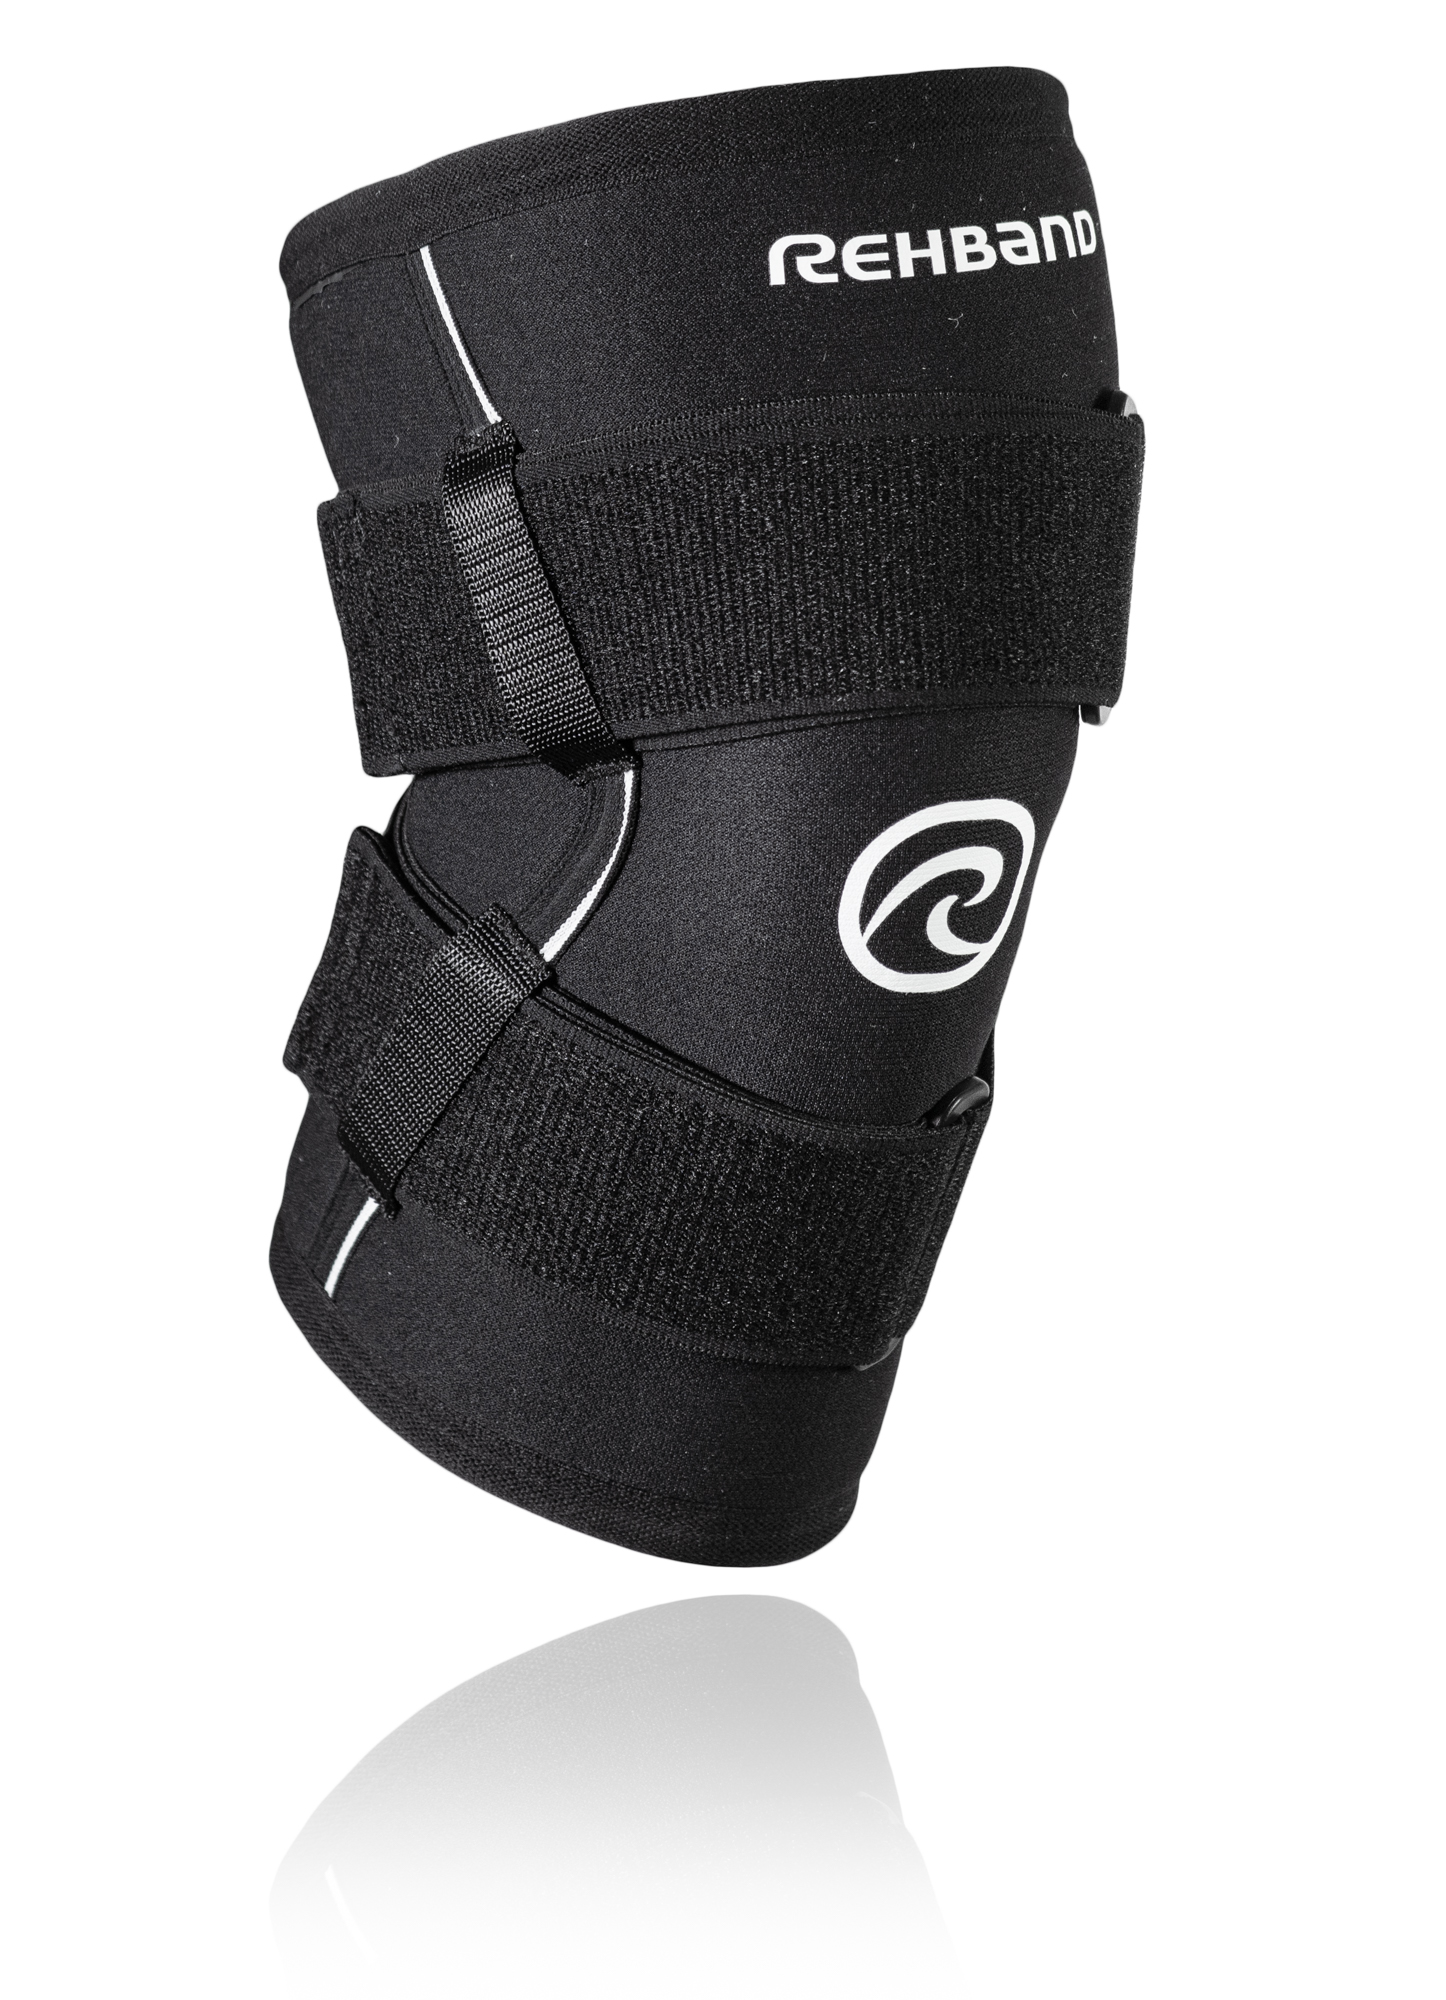 Rehband 7791 X-RX Elbow Support